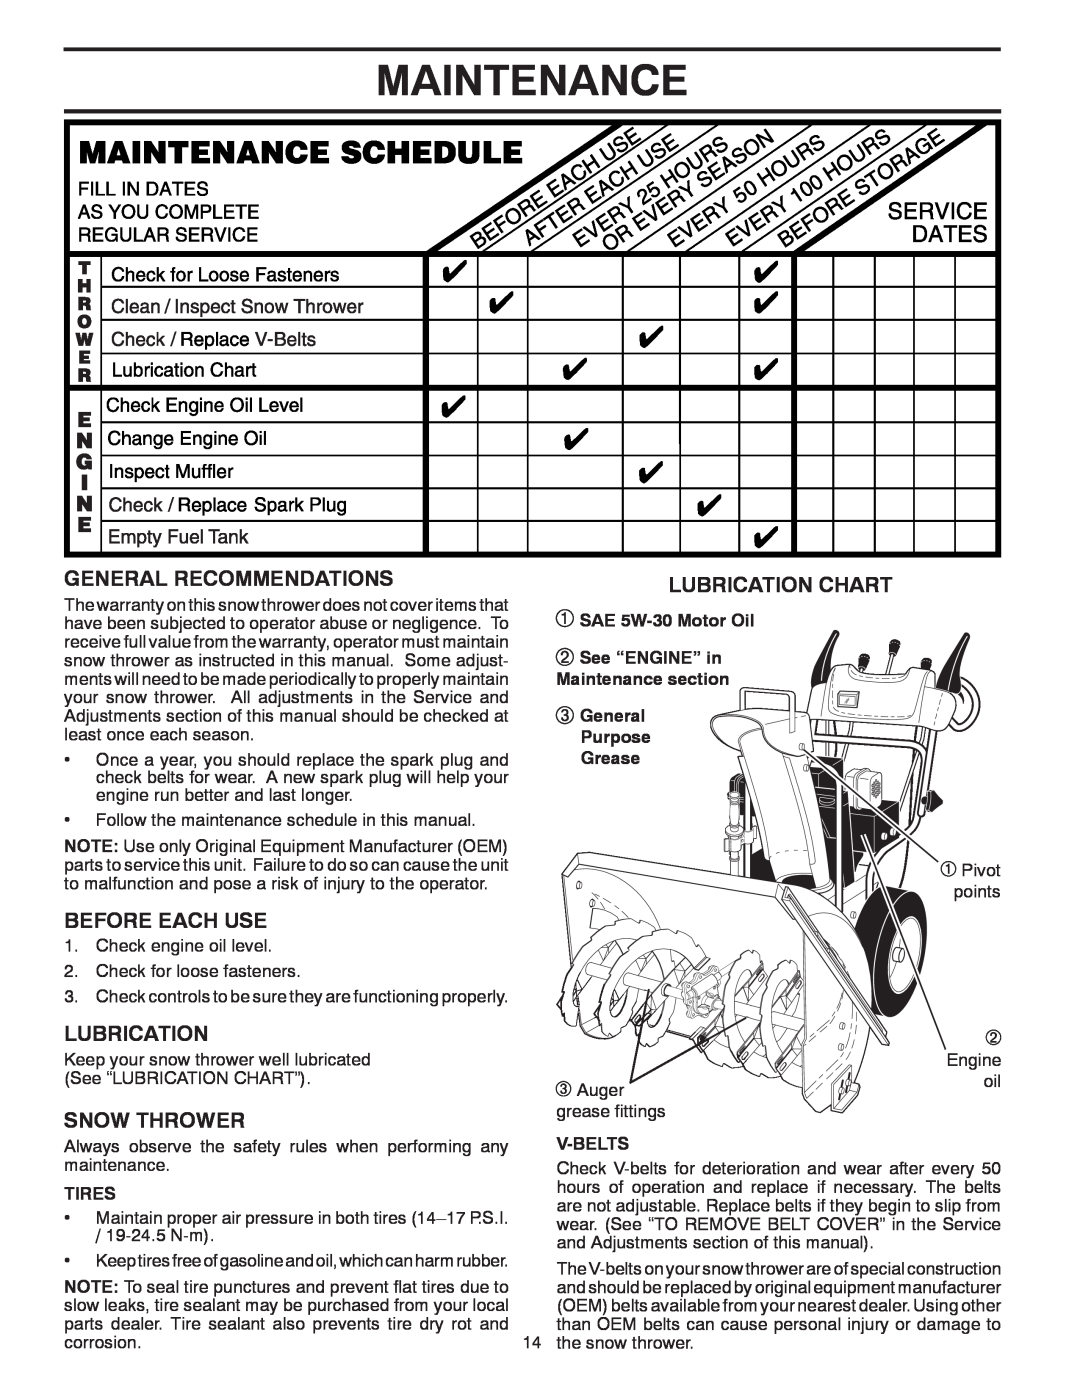 Poulan 96192001901 Maintenance, General Recommendations, Before Each Use, Snow Thrower, Lubrication Chart, Tires 